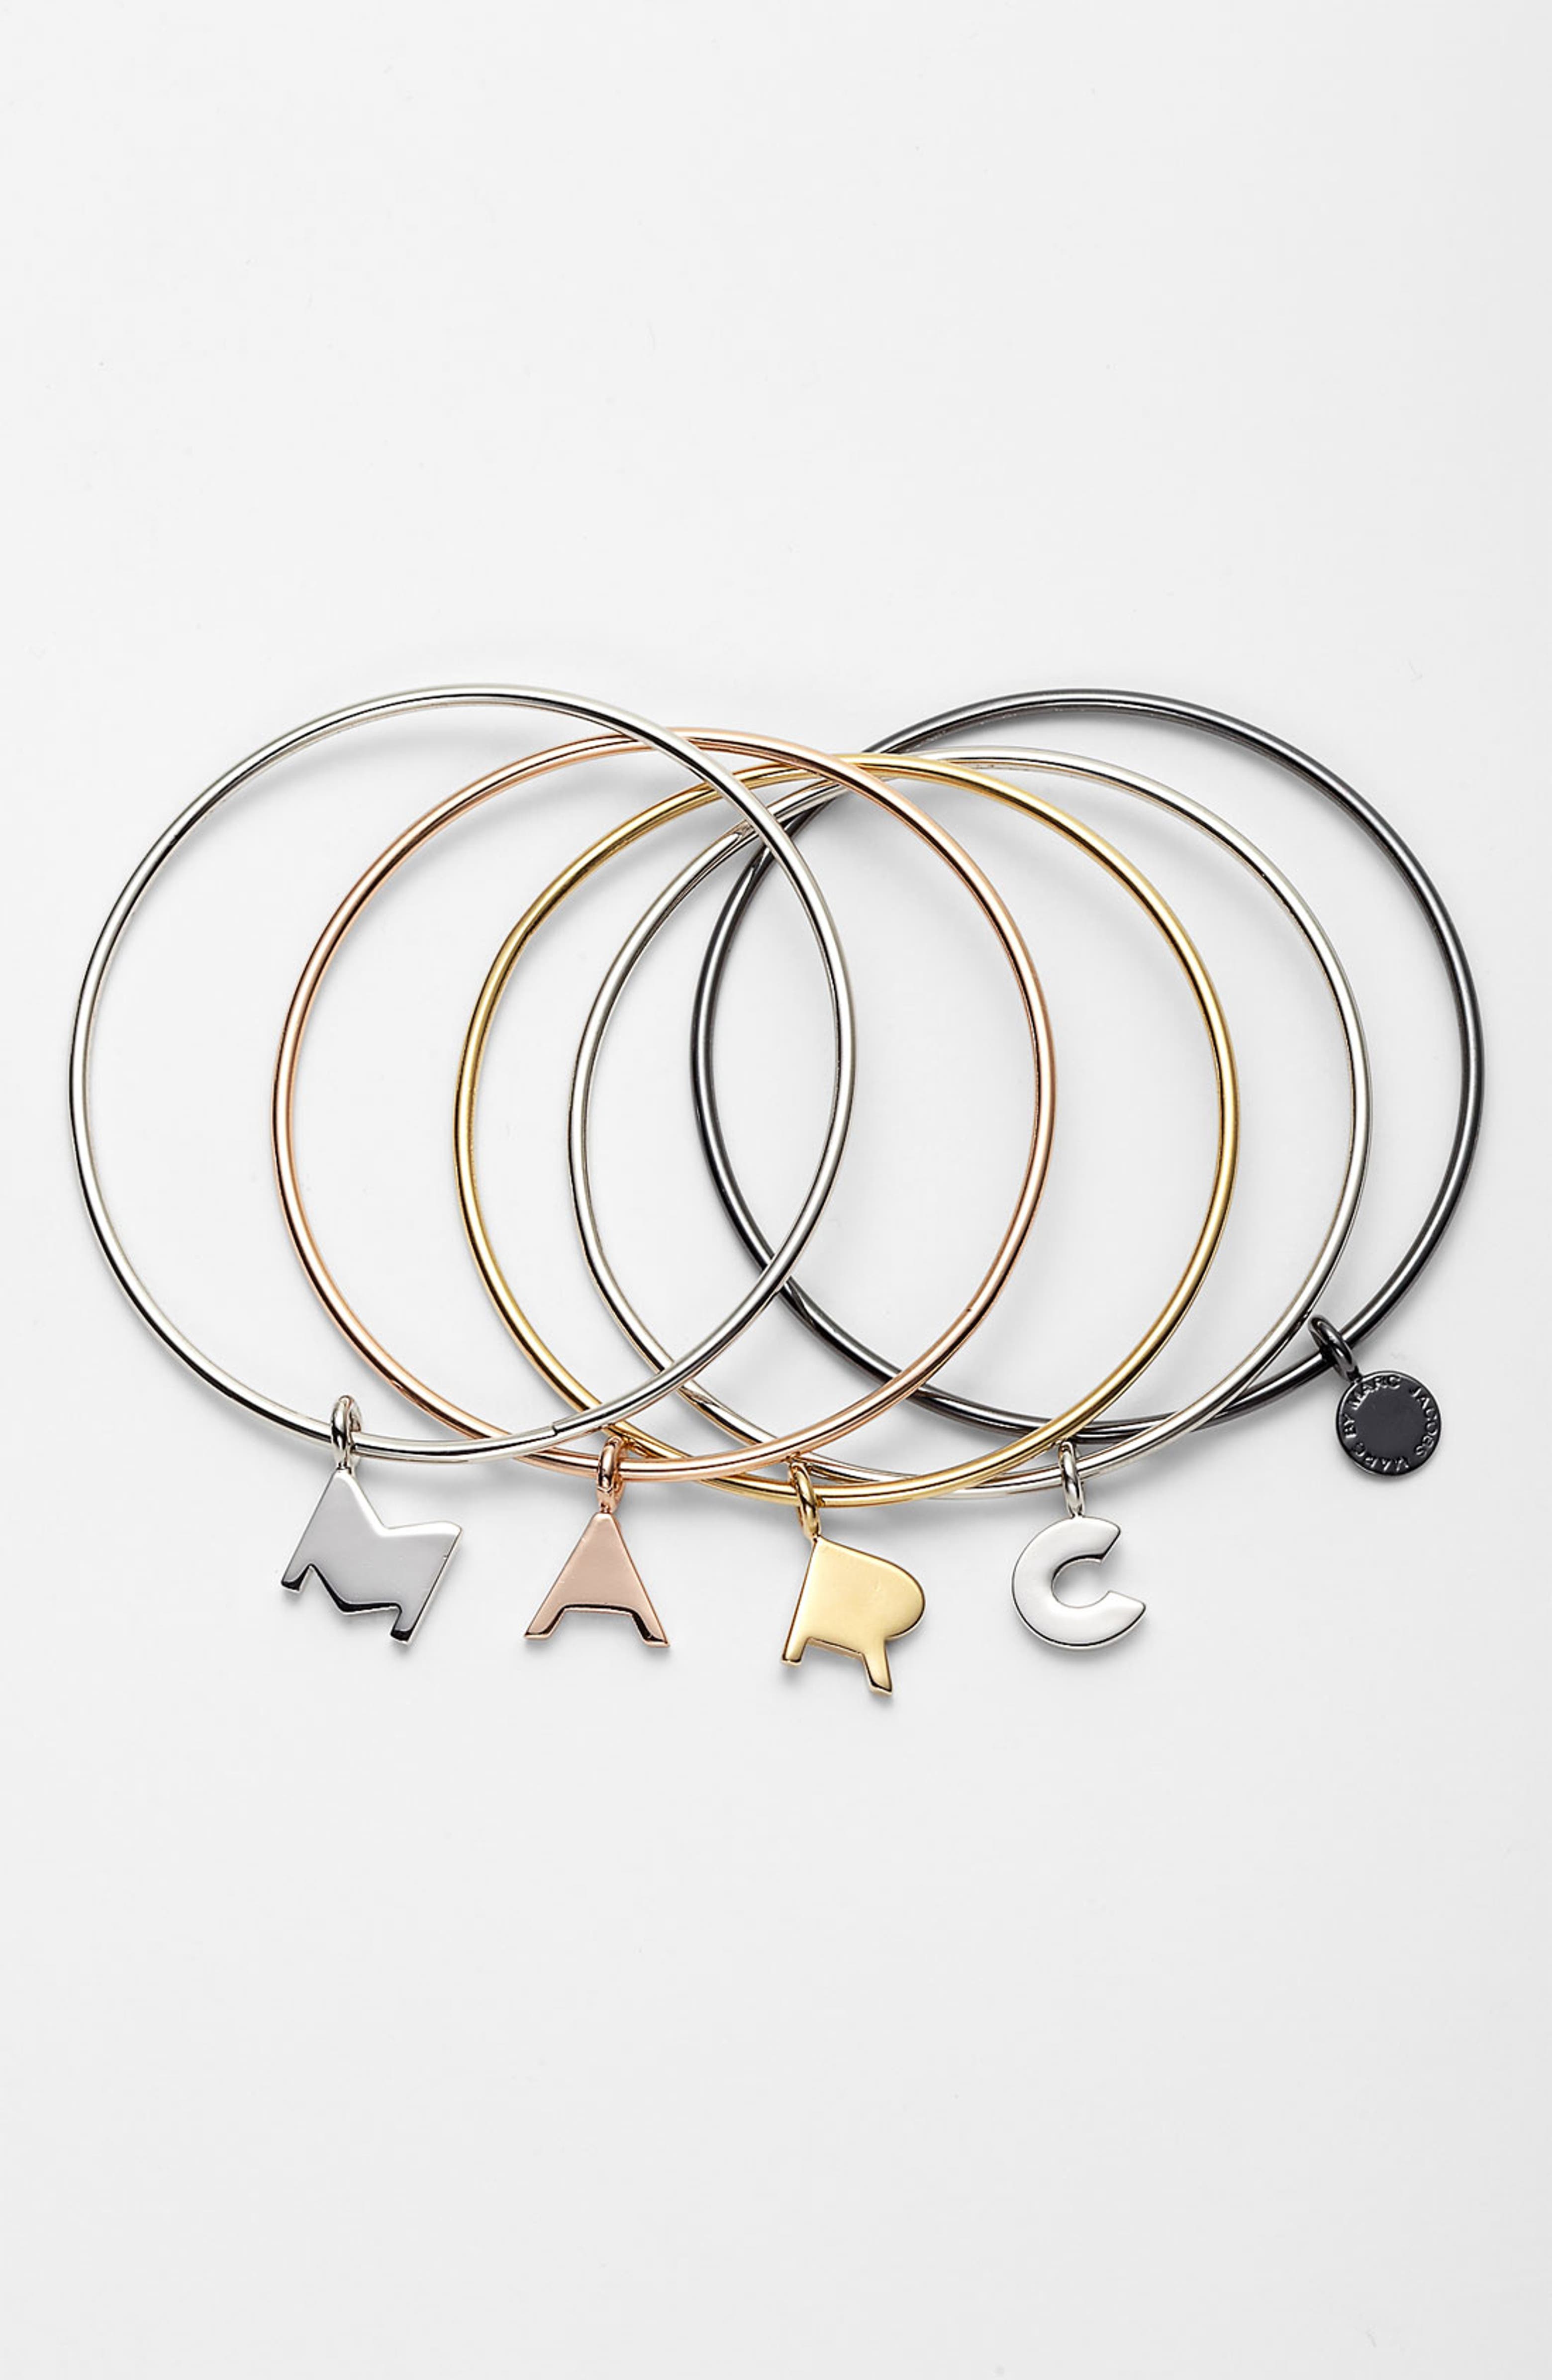 MARC BY MARC JACOBS Charm Bangles (Set of 5) | Nordstrom